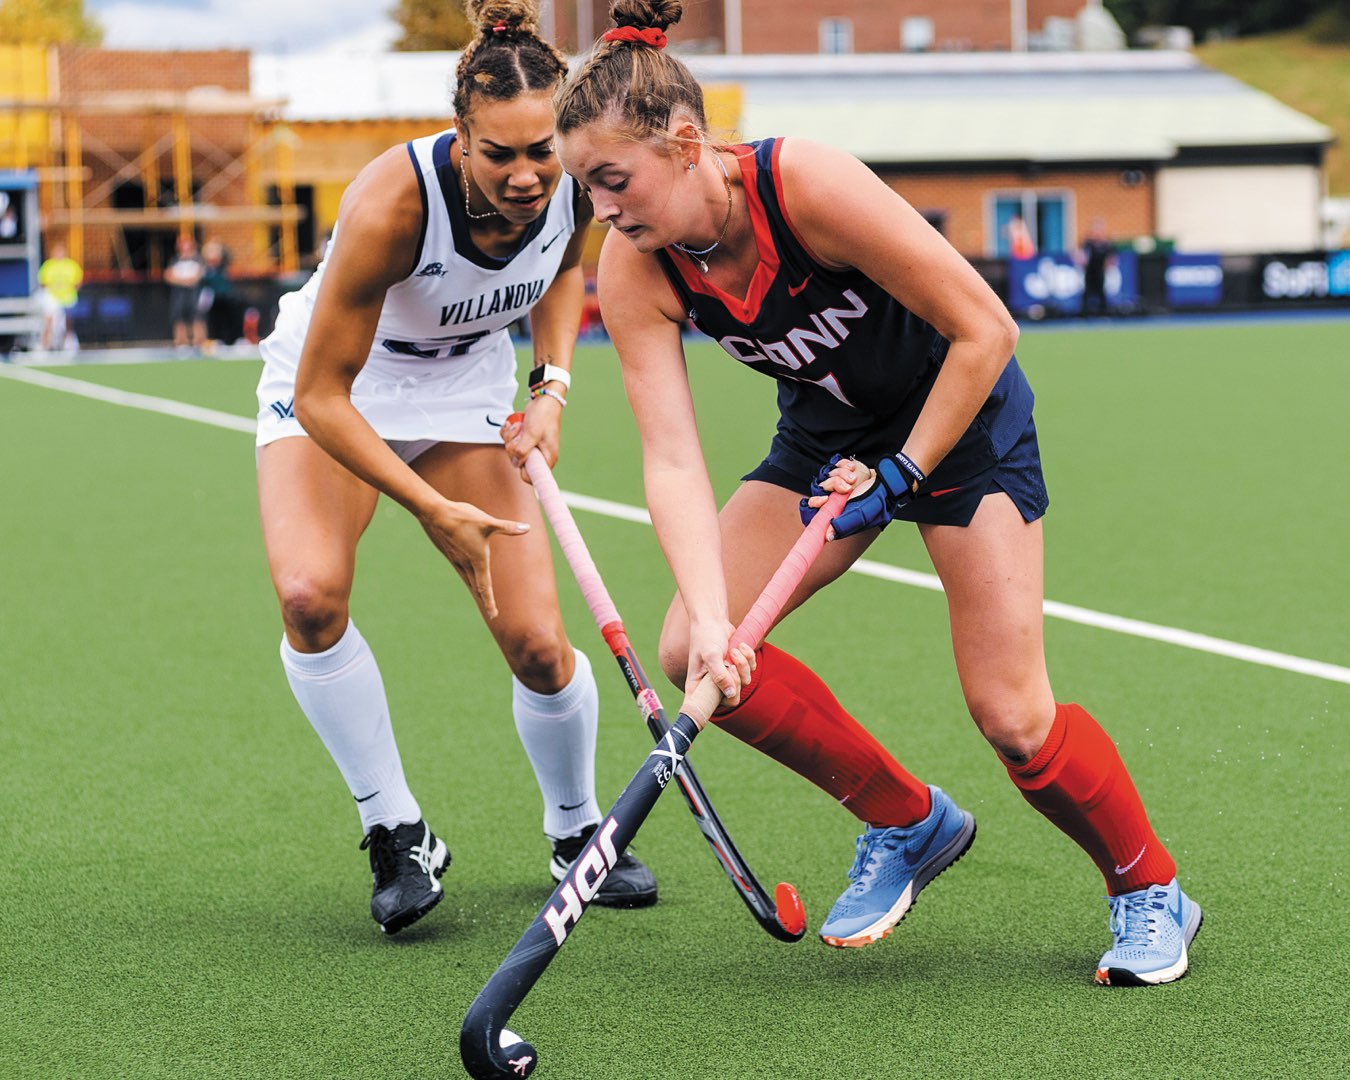 A Villanova Women’s Field Hockey player on the field engaged in play against a player from Connecticut